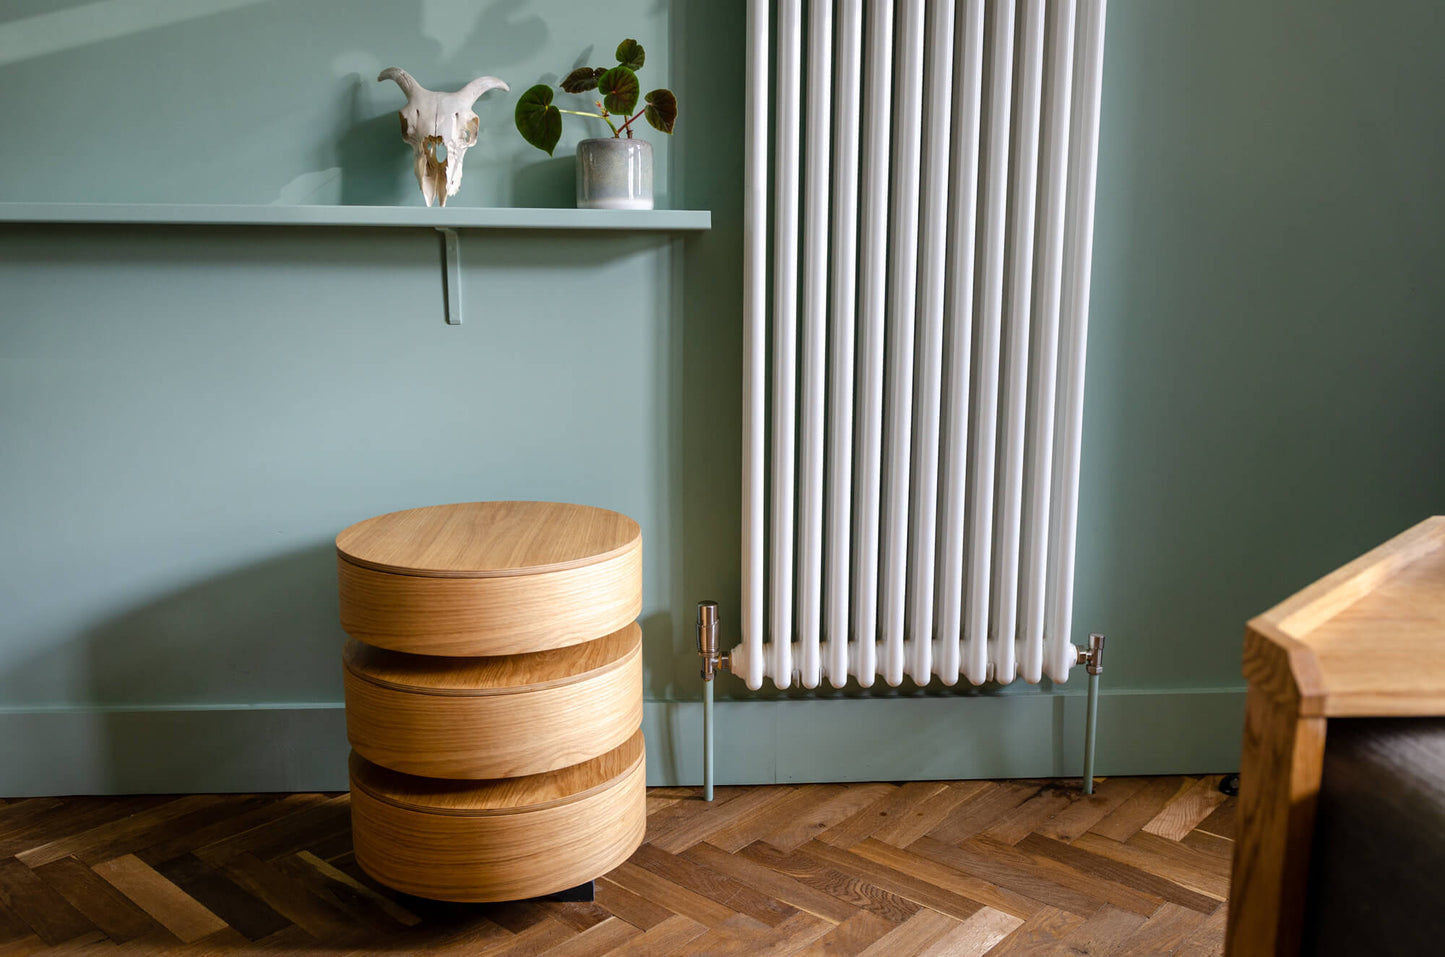 AIR | Oak - circular chest of drawers - bedside table | side table